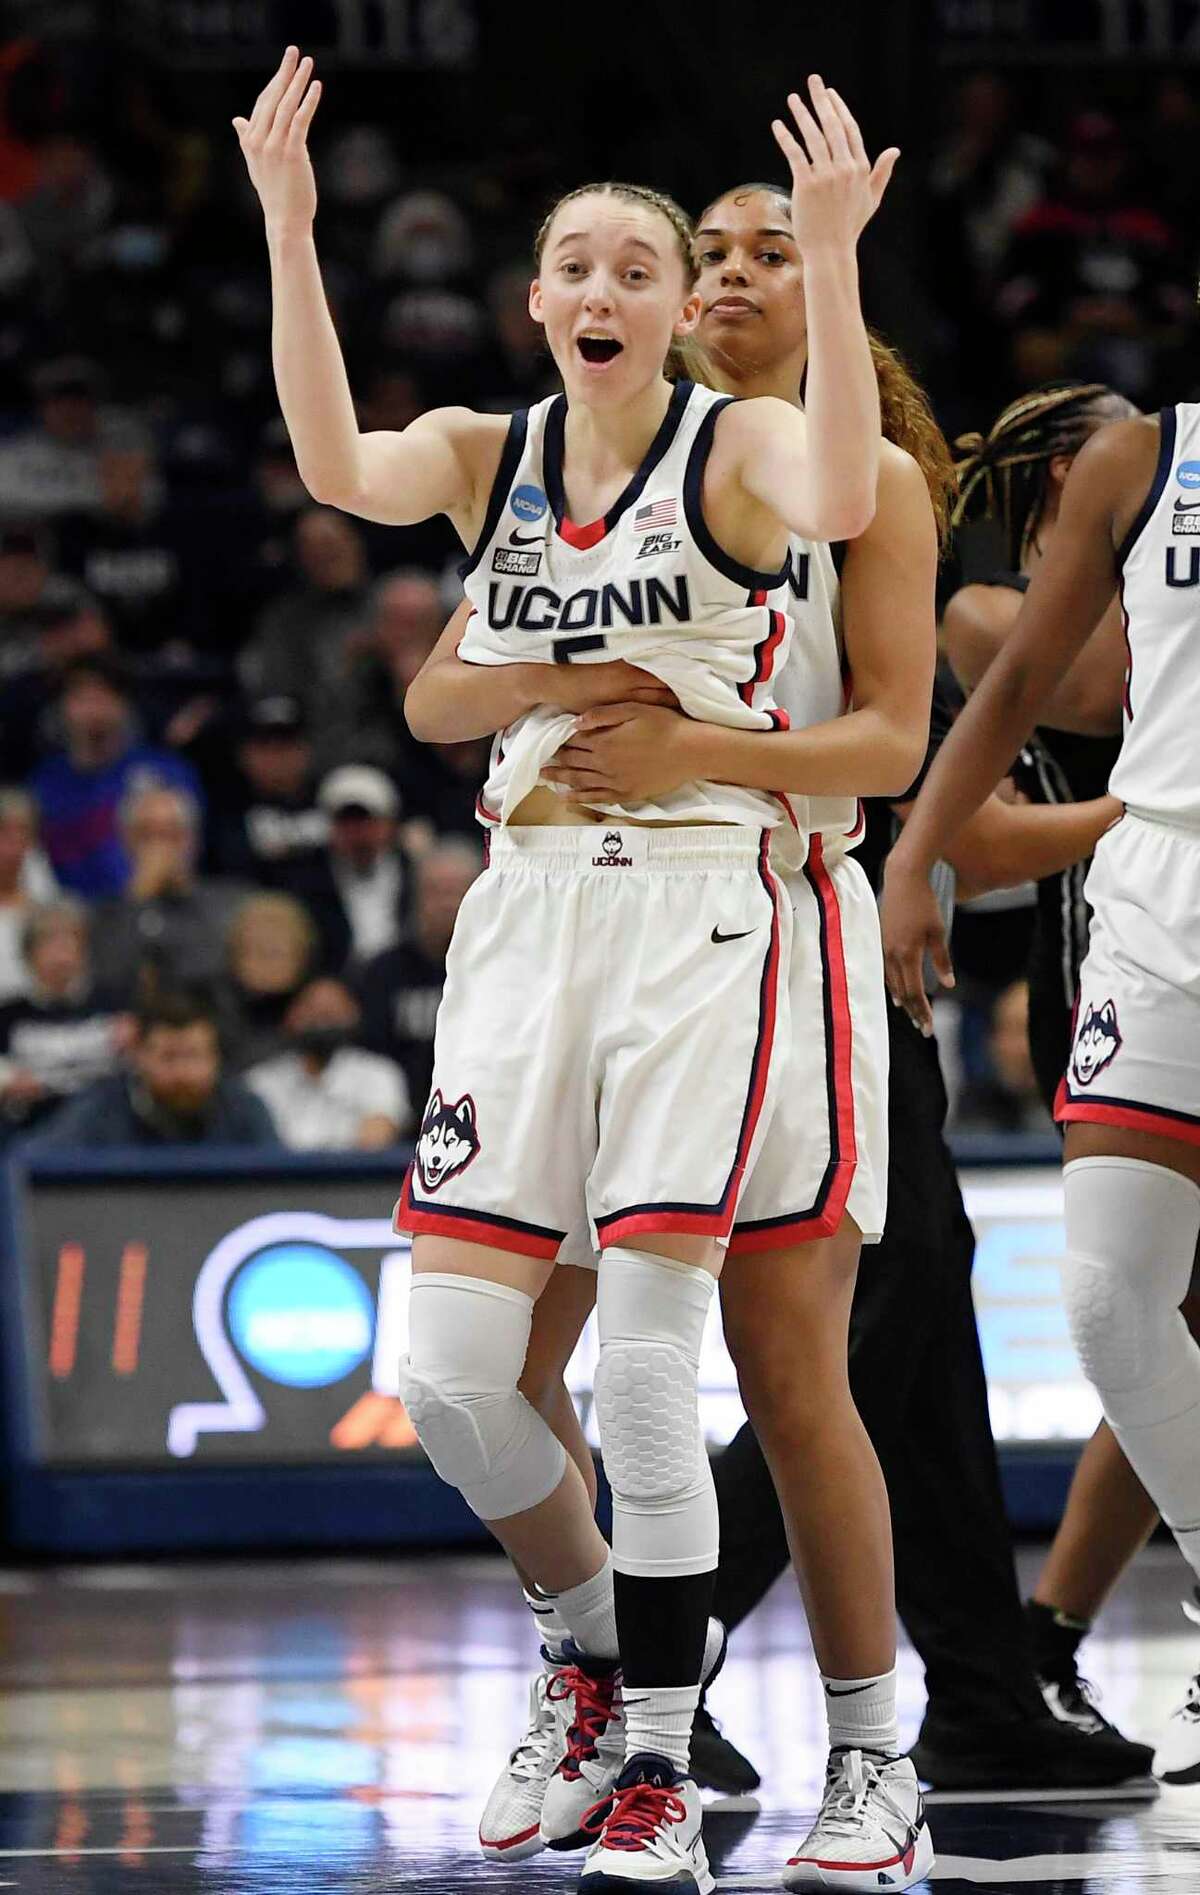 UConn’s Paige Bueckers, front, calls for support from fans as she is pulled away from a jump-ball scrum by teammate Evina Westbrook during Monday’s game against UCF in Storrs.